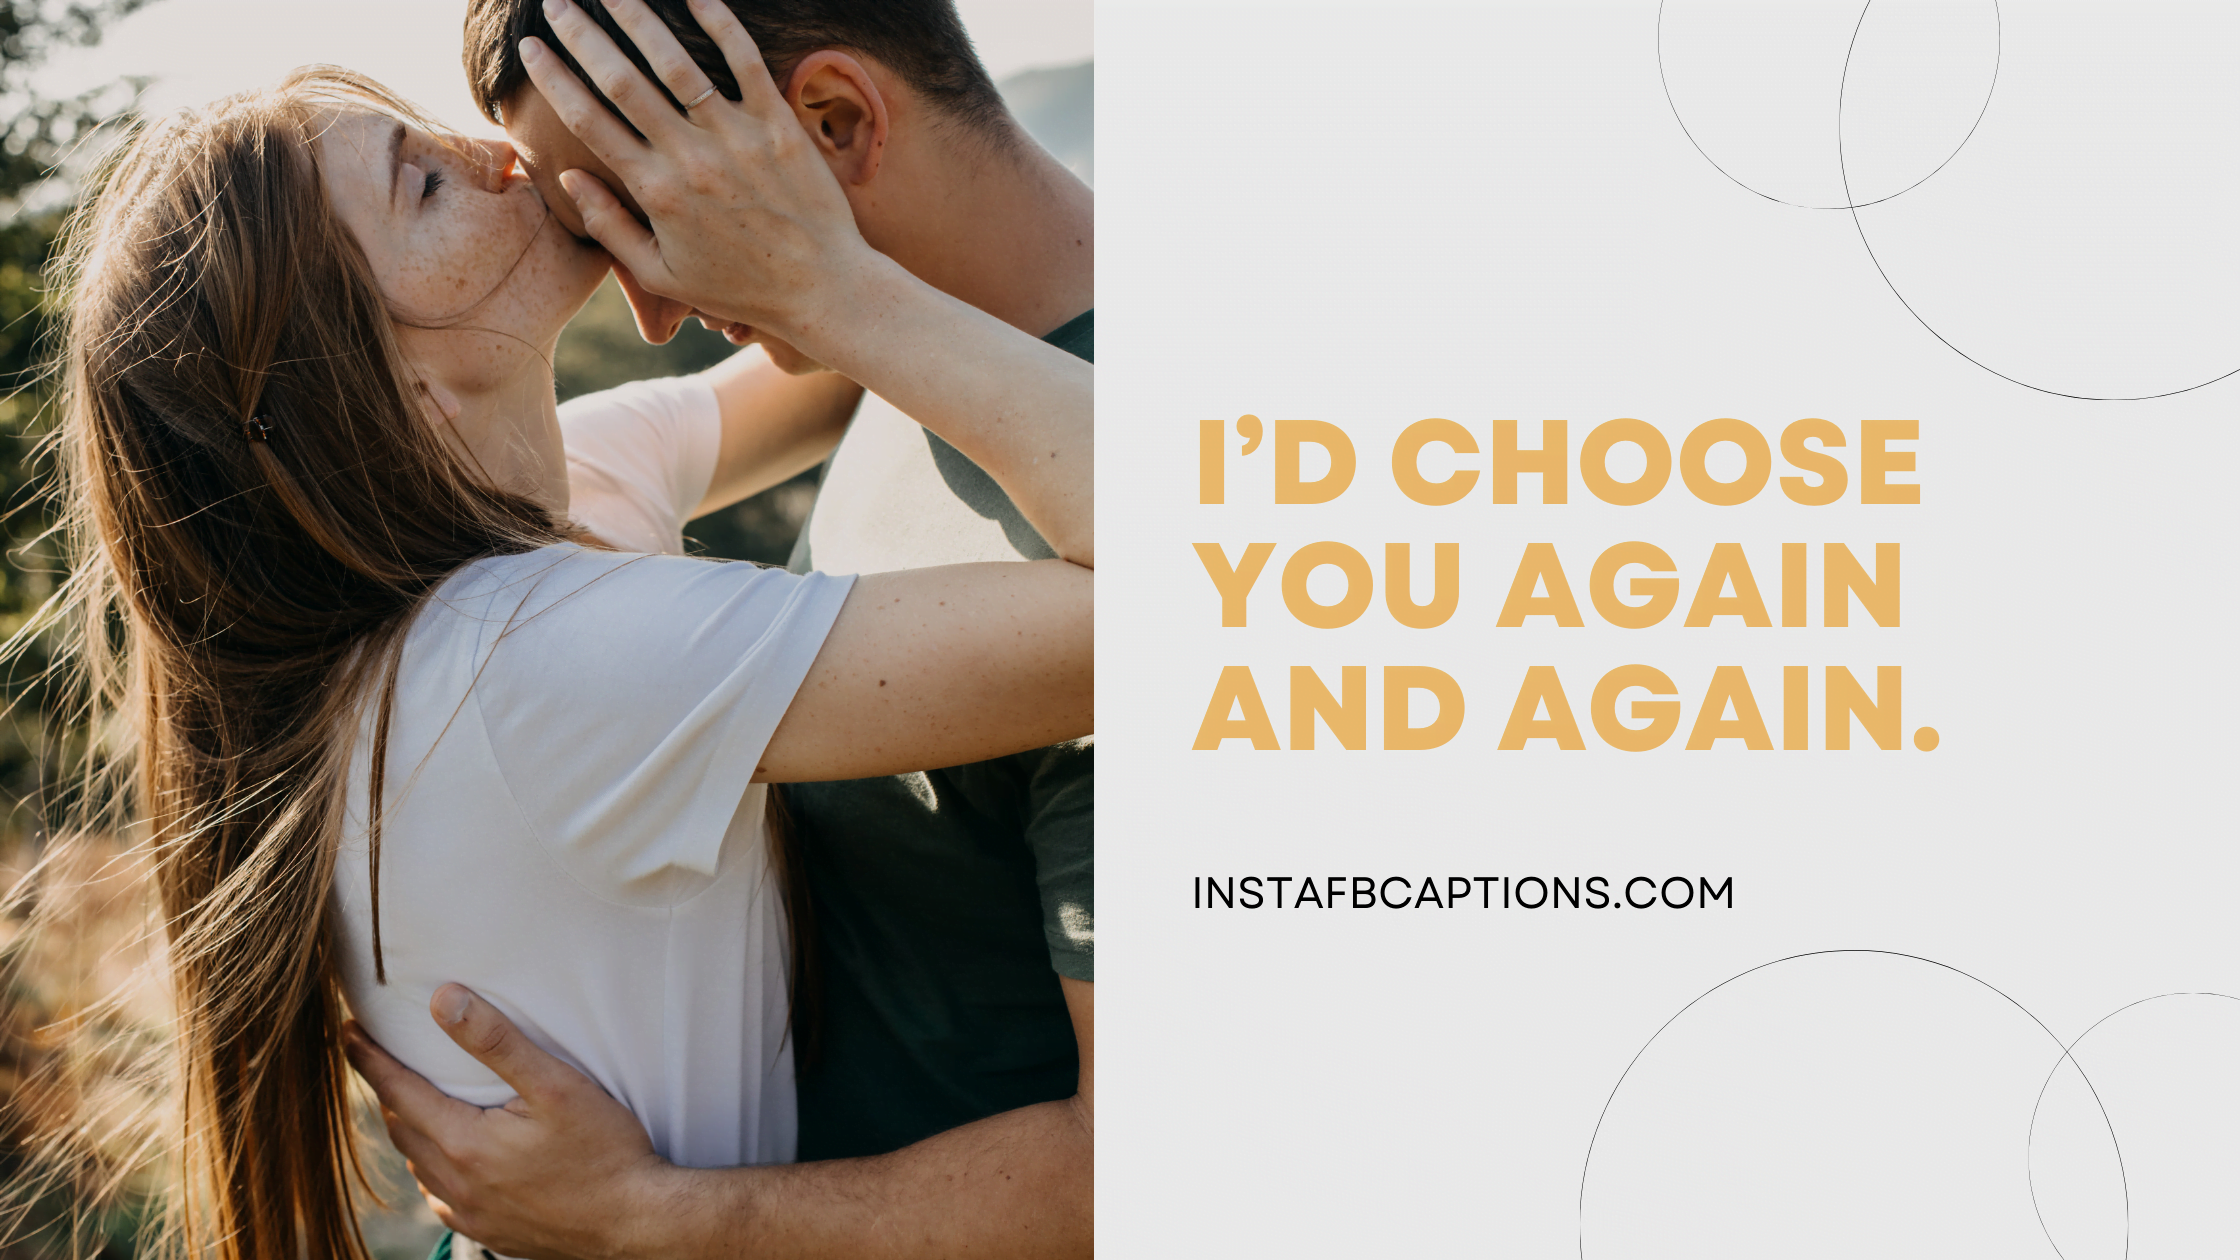 I’d choose you again and again boyfriend captions for instagram - Short Captions for your Boyfriend - 450+ Cute Instagram Captions For Boyfriend 2022